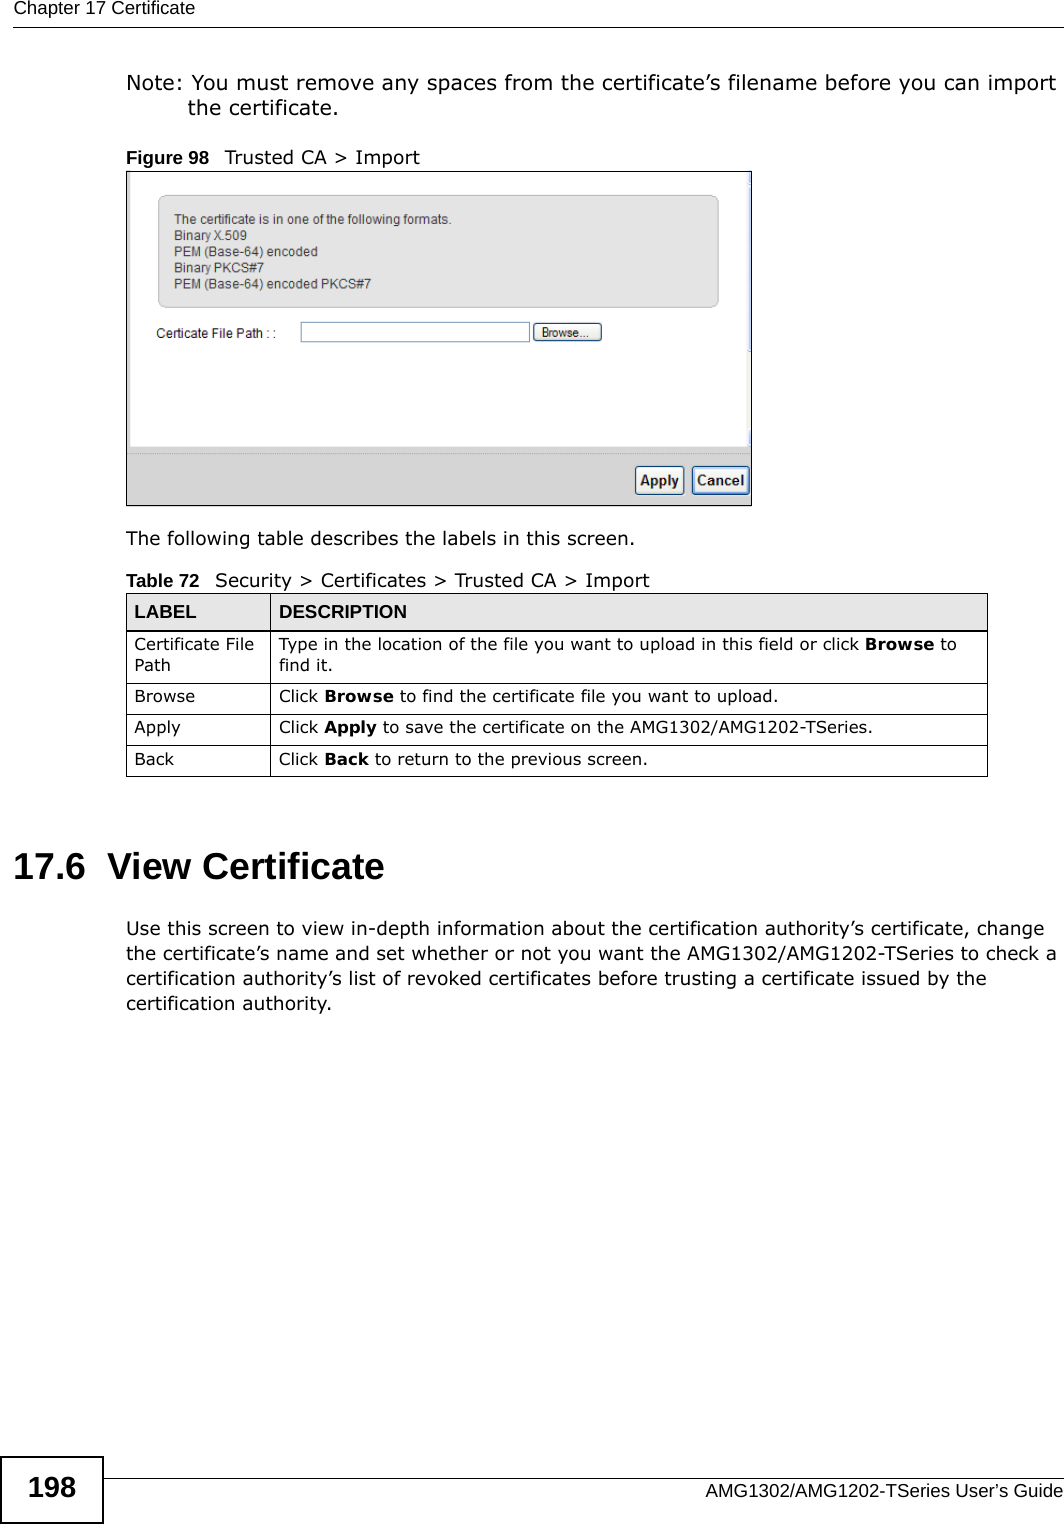 Chapter 17 CertificateAMG1302/AMG1202-TSeries User’s Guide198Note: You must remove any spaces from the certificate’s filename before you can import the certificate.Figure 98   Trusted CA &gt; ImportThe following table describes the labels in this screen.17.6  View Certificate Use this screen to view in-depth information about the certification authority’s certificate, change the certificate’s name and set whether or not you want the AMG1302/AMG1202-TSeries to check a certification authority’s list of revoked certificates before trusting a certificate issued by the certification authority.Table 72   Security &gt; Certificates &gt; Trusted CA &gt; ImportLABEL DESCRIPTIONCertificate File Path Type in the location of the file you want to upload in this field or click Browse to find it.Browse Click Browse to find the certificate file you want to upload. Apply Click Apply to save the certificate on the AMG1302/AMG1202-TSeries.Back Click Back to return to the previous screen.